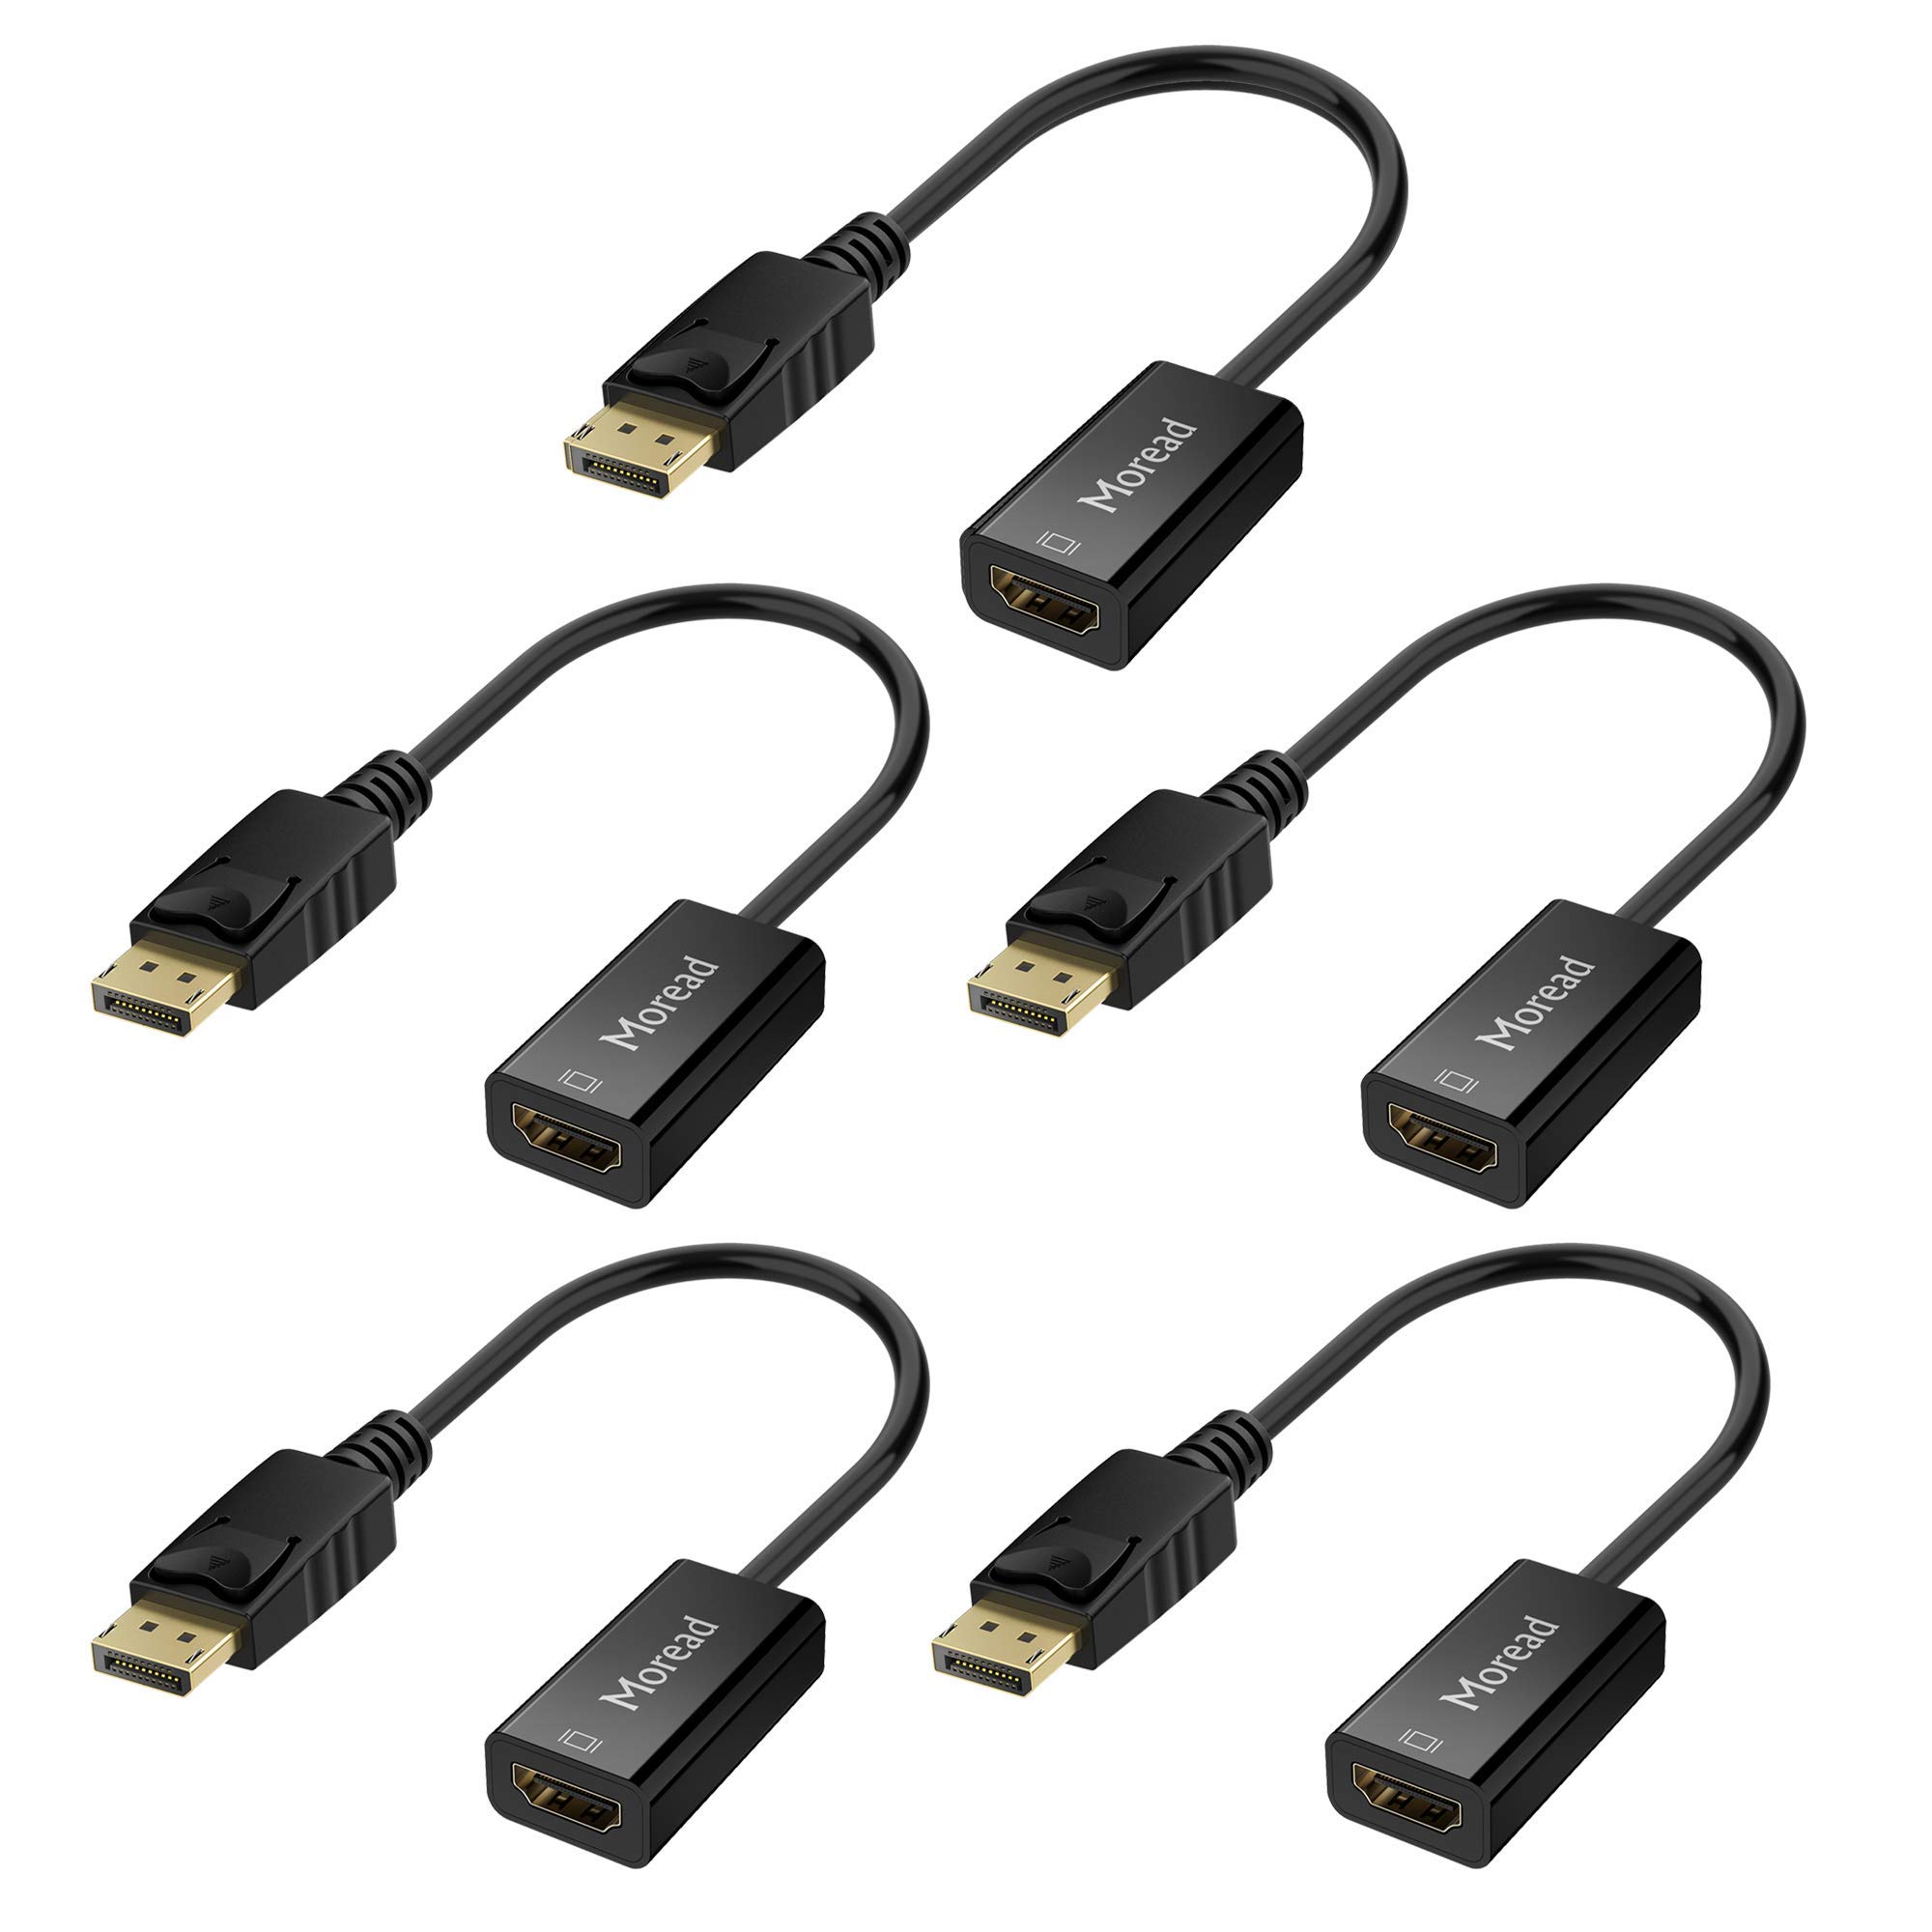 Book Cover Moread DisplayPort (DP) to HDMI Adapter, 5 Pack, Gold-Plated Uni-Directional Display Port PC to HDMI Screen Converter (Male to Female) Compatible with HP, Dell, Lenovo, NVIDIA, AMD & More, Passive 5 Black